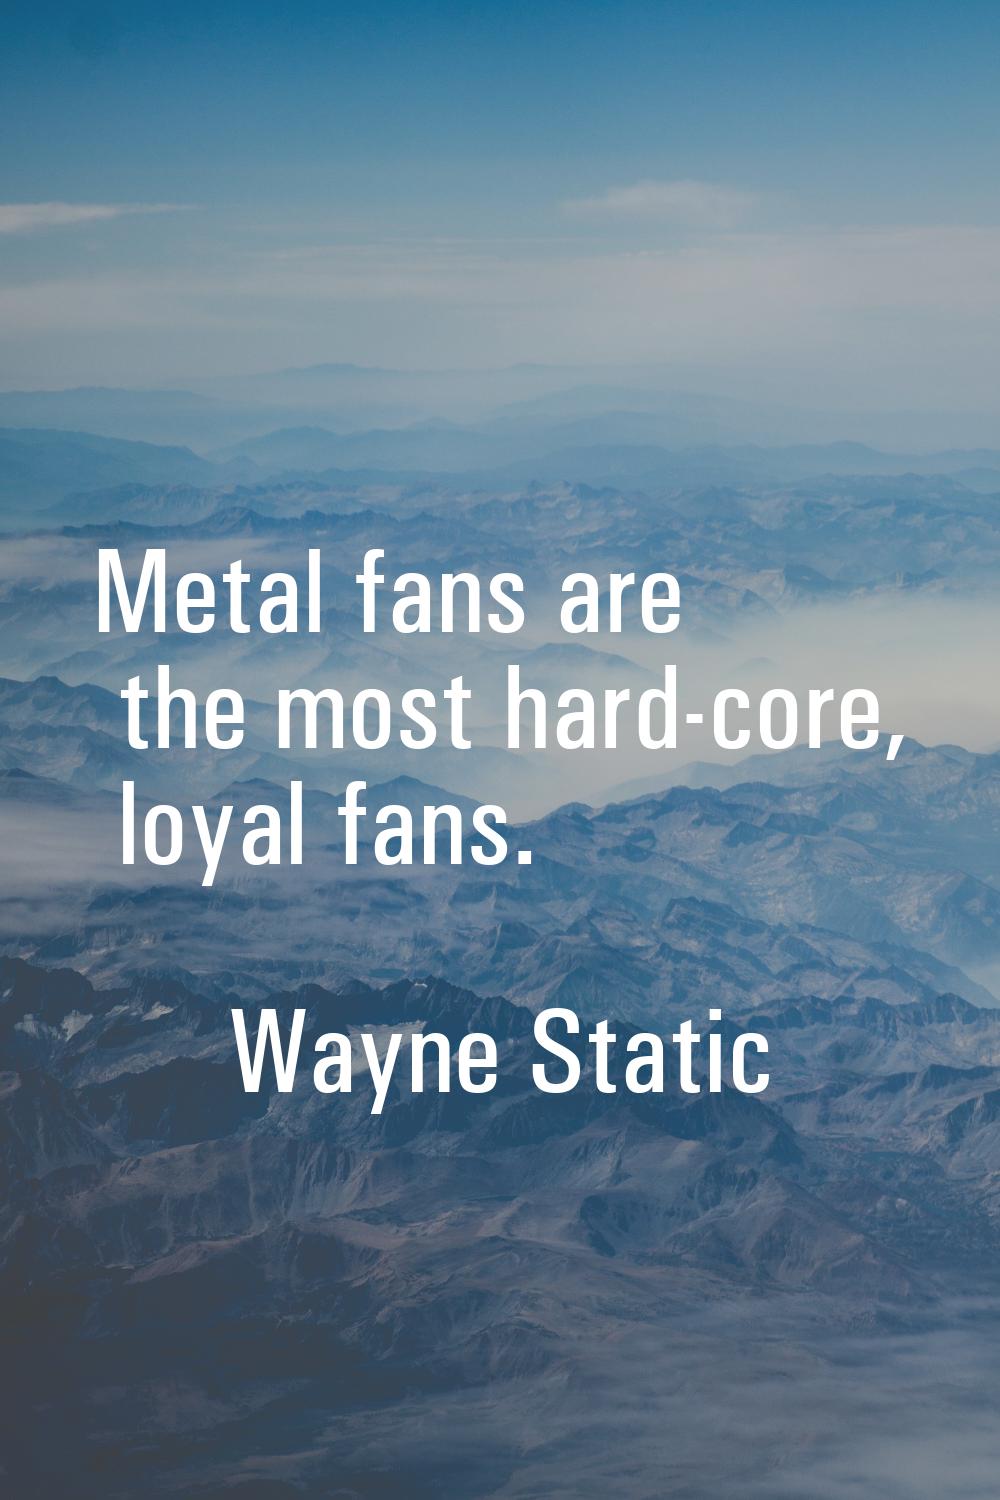 Metal fans are the most hard-core, loyal fans.